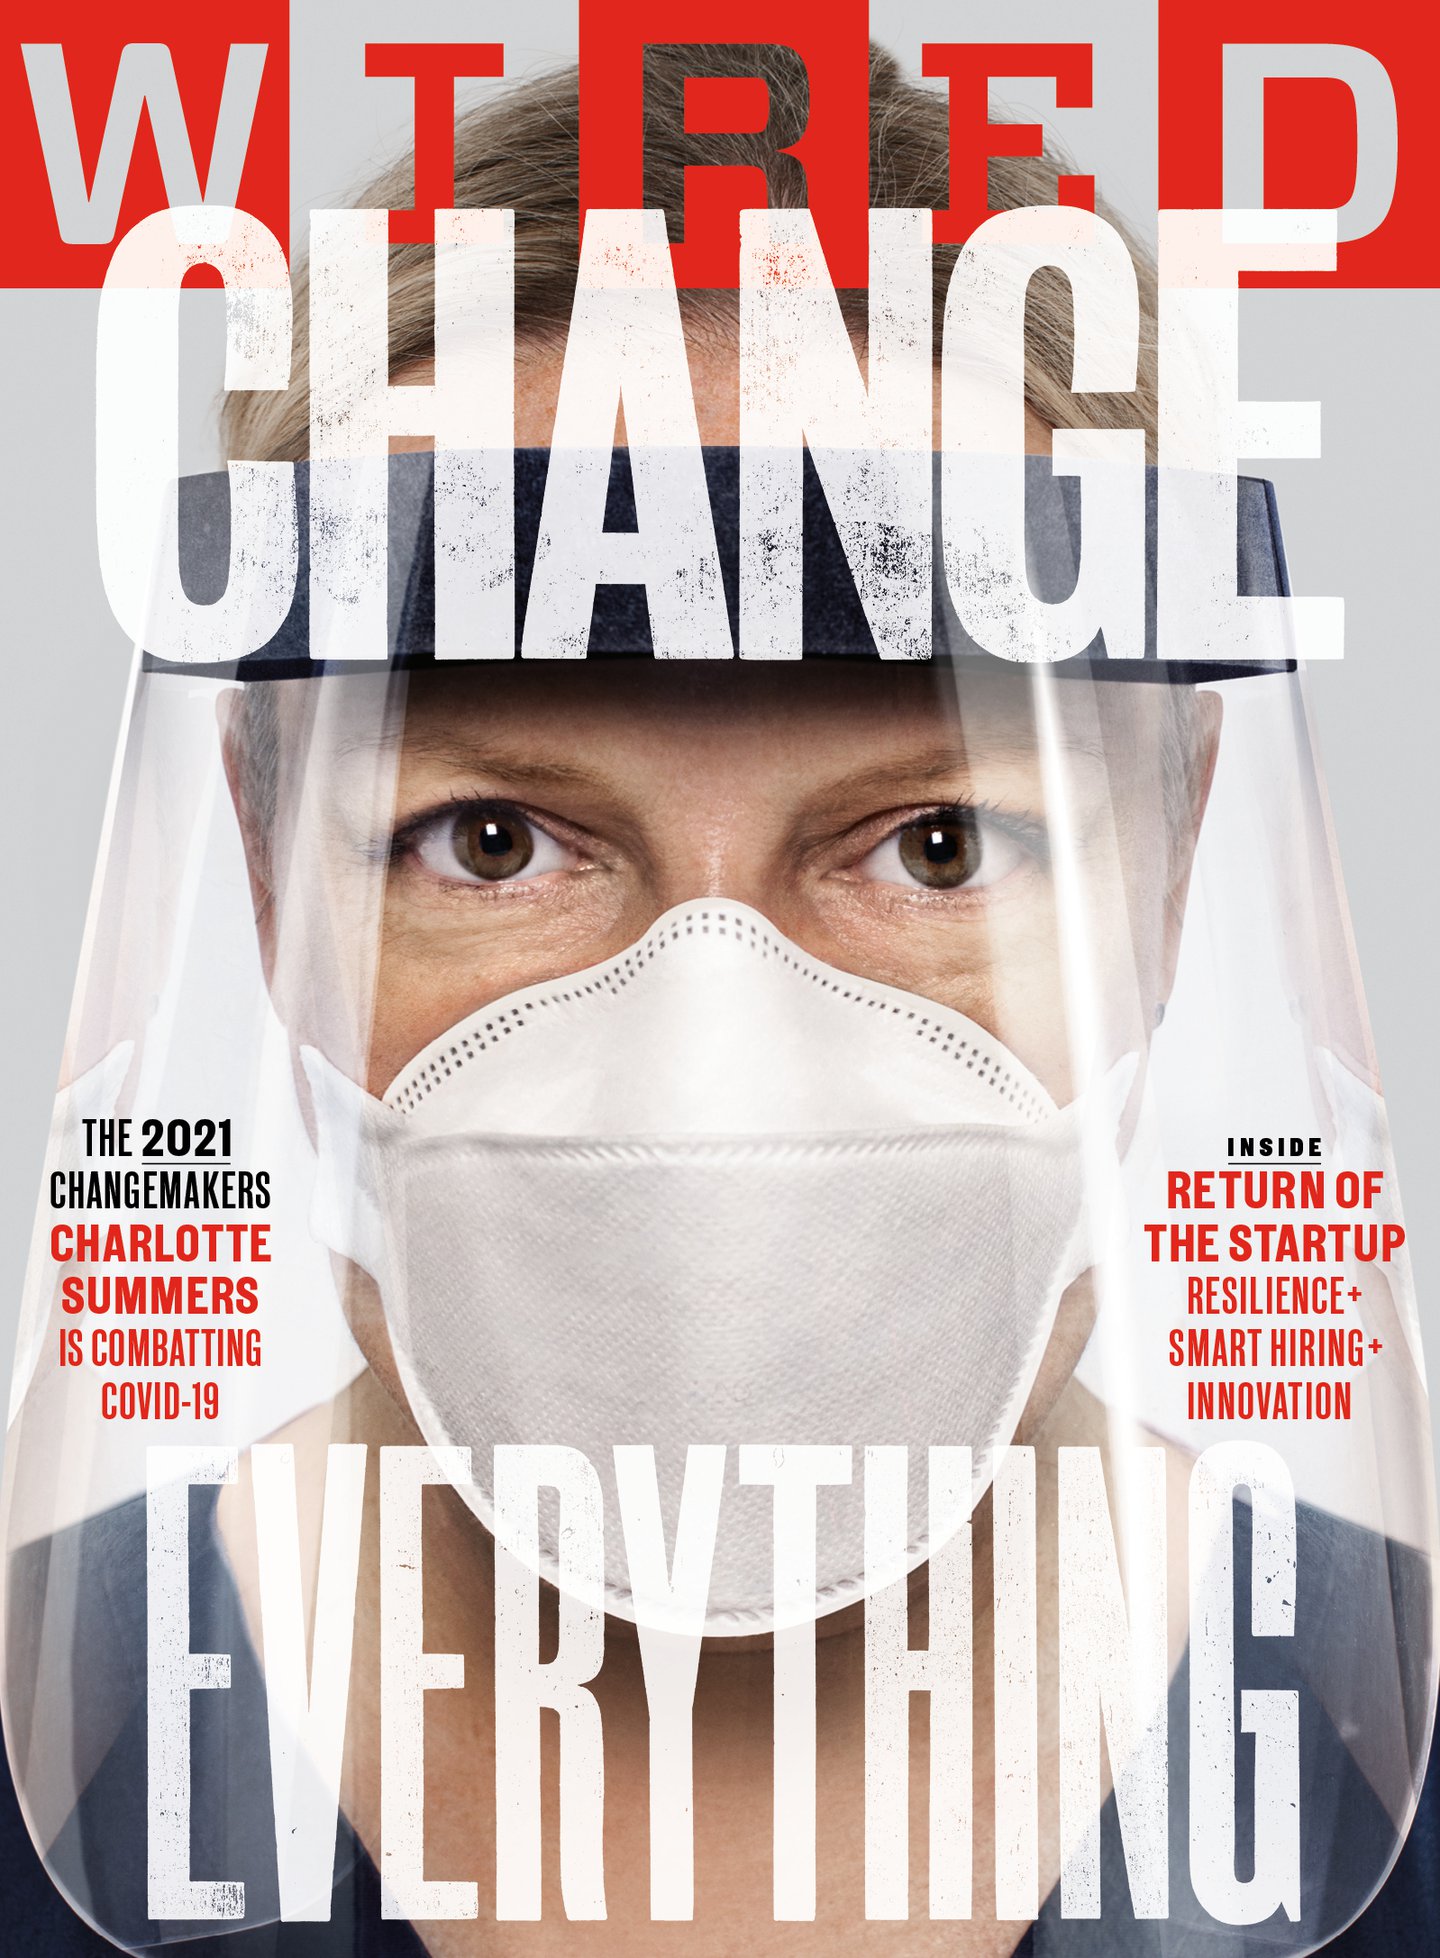 Anthony Burrill and Wired mag’s Andrew Diprose discuss how they made January’s Change Everything